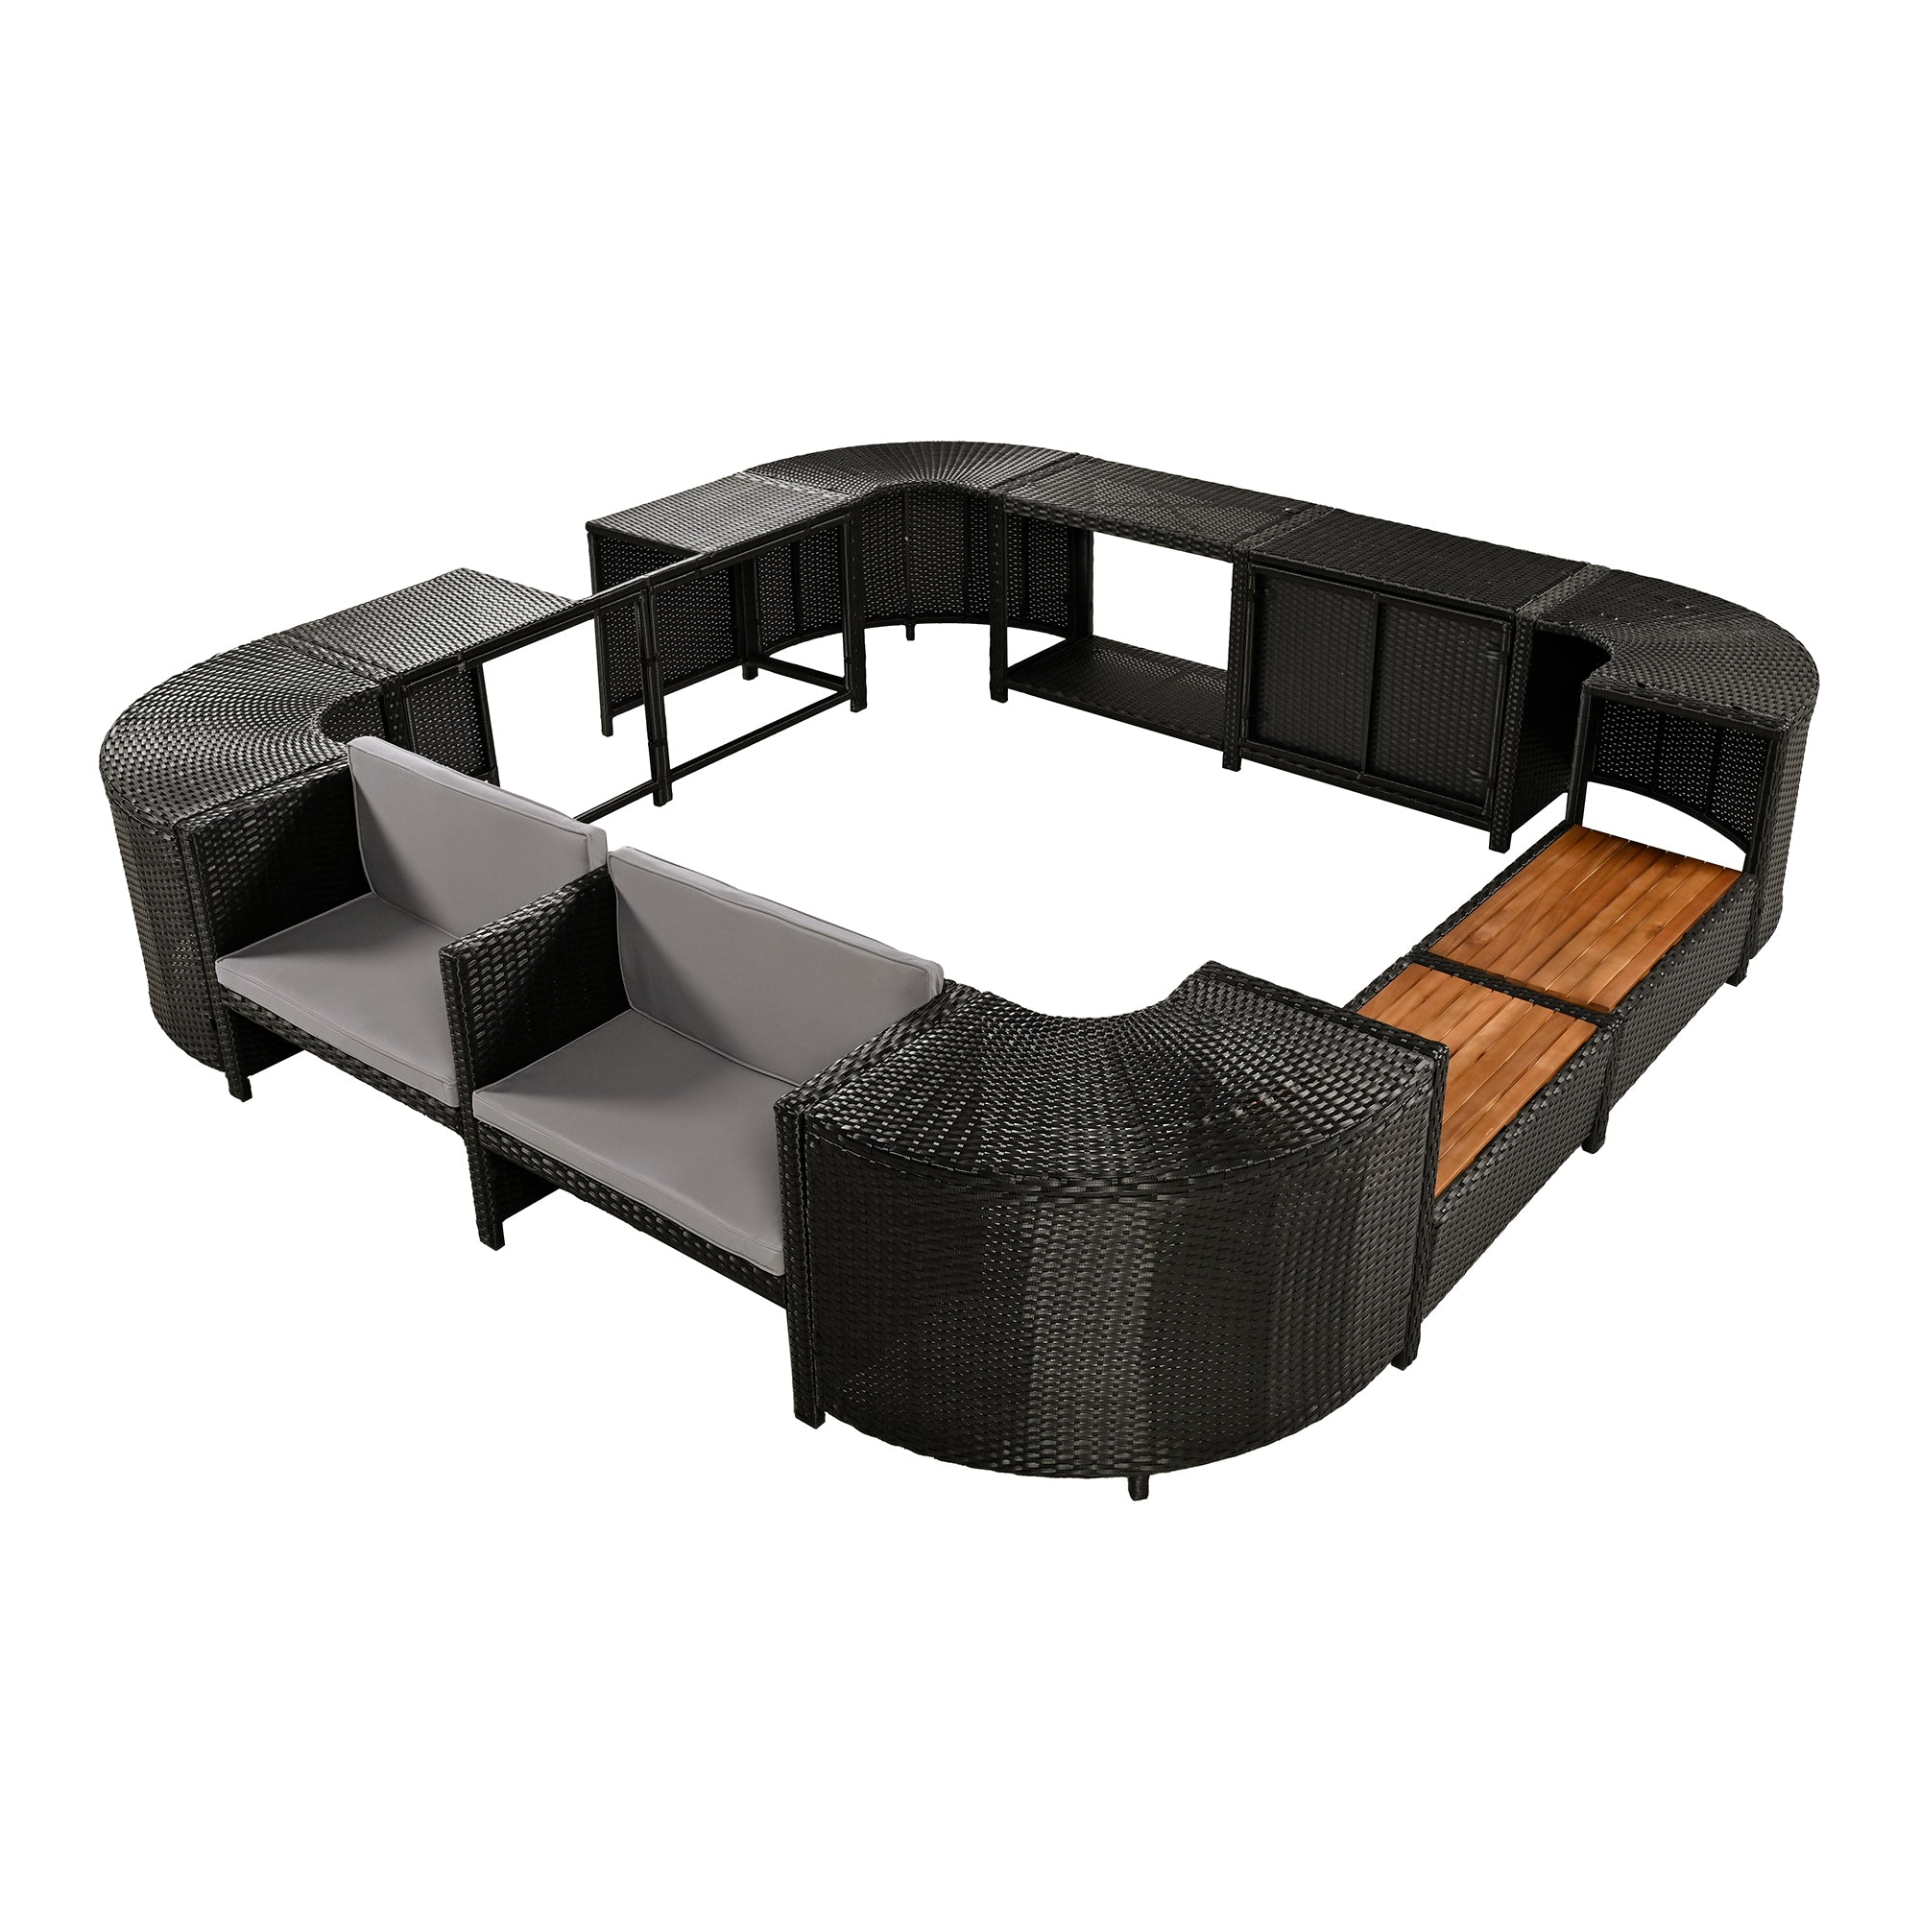 Spa Surround Spa Frame Quadrilateral Outdoor Rattan Sectional Sofa Set with Mini Sofa, Wooden Seats and Storage Spaces, Grey, Goodies N Stuff